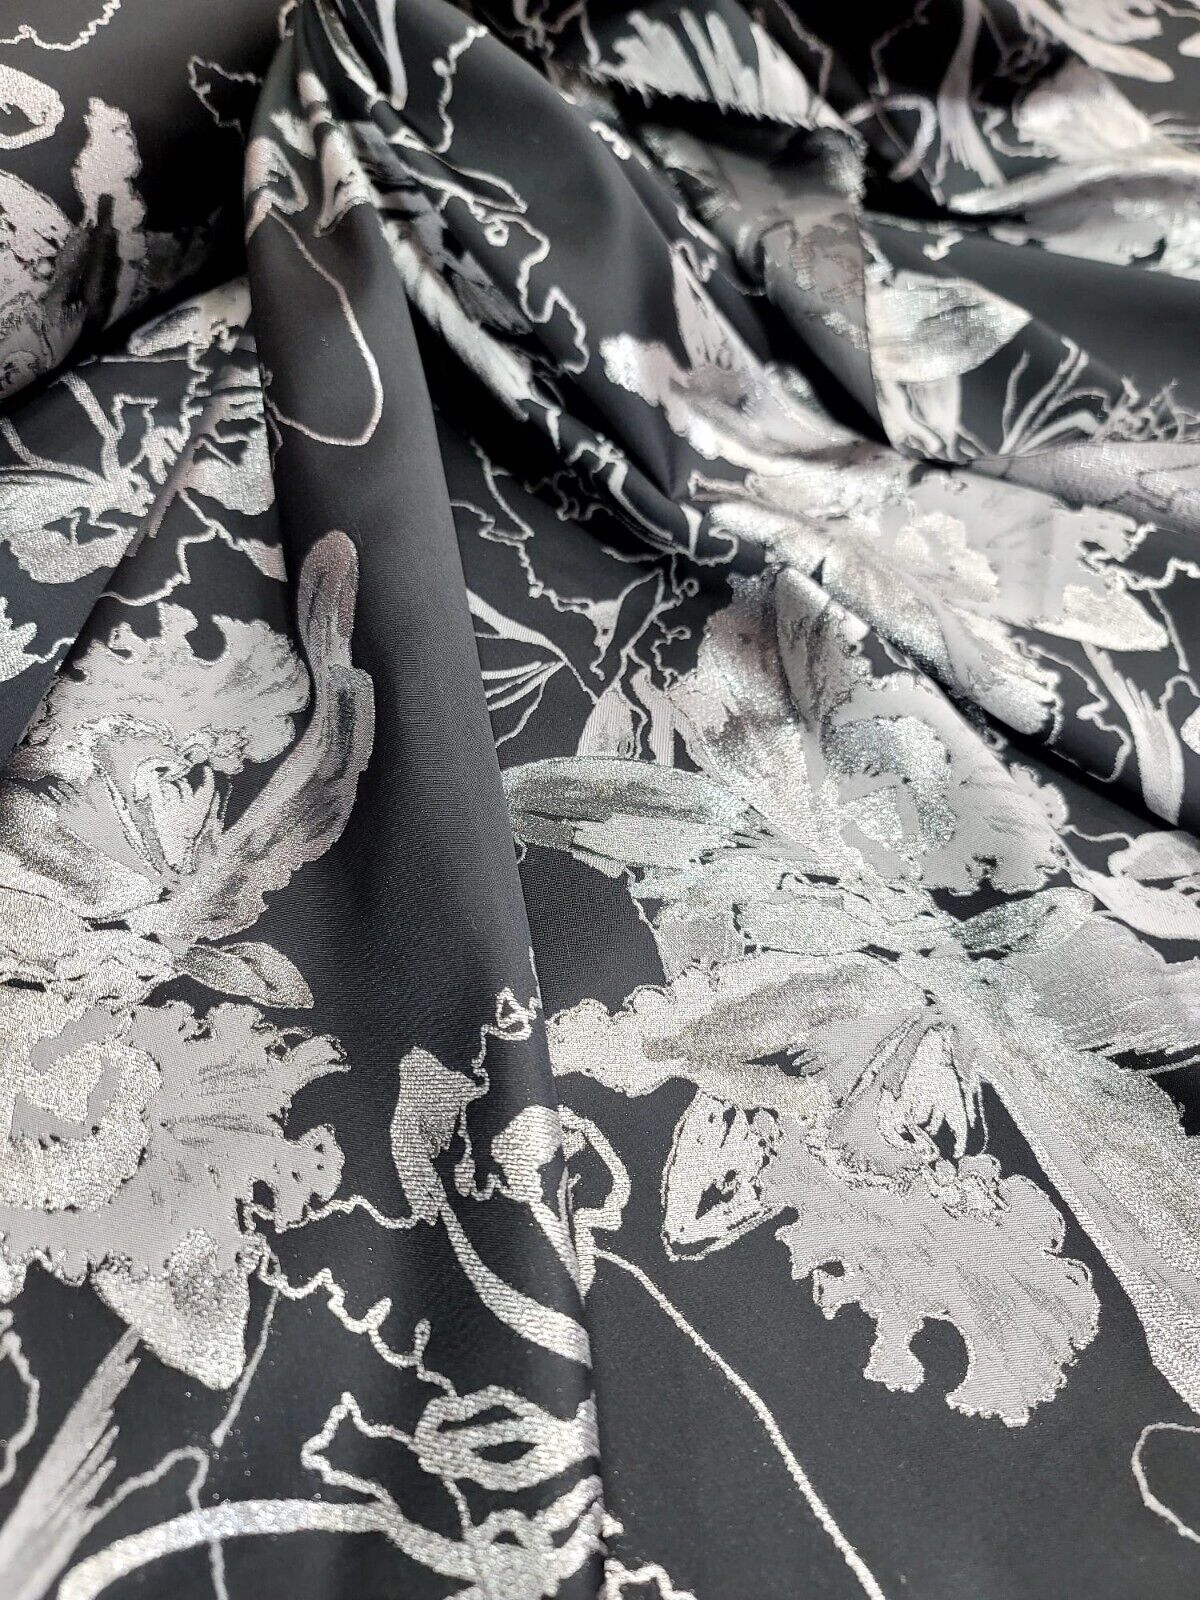 Silver Floral Black Brocade Fabric - 60" Width - Sold by the Yard